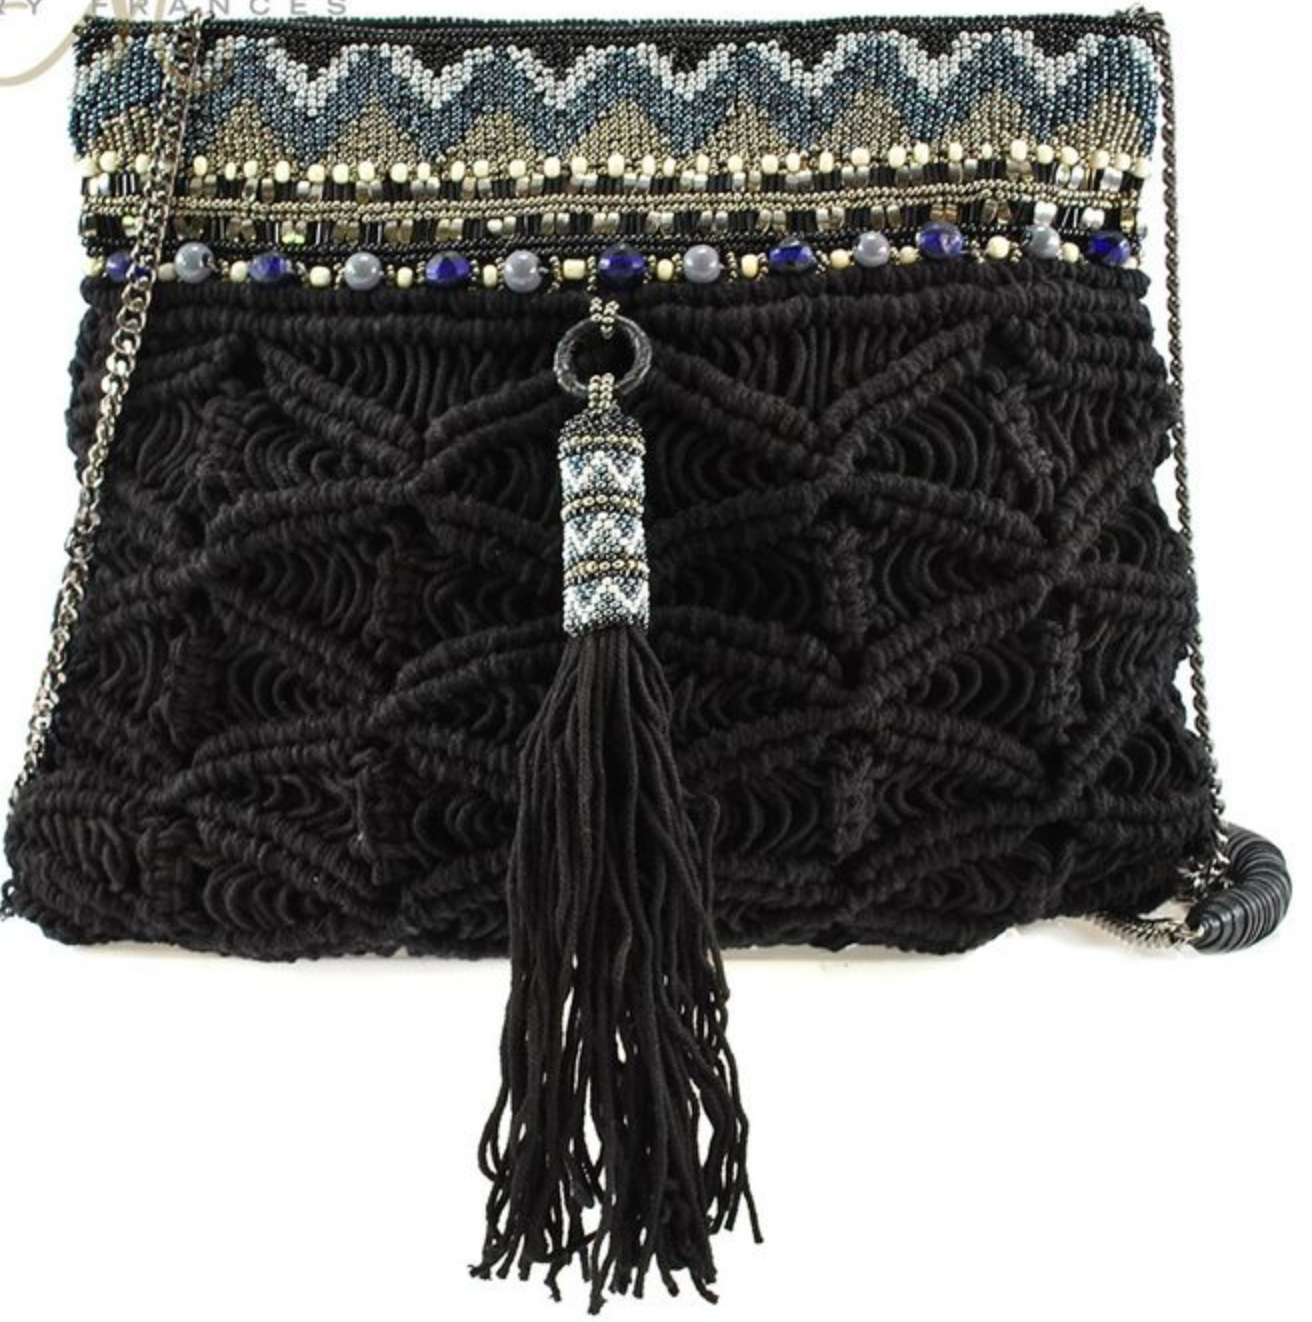 Purse of Macrame and hand-beaded craftsmanship